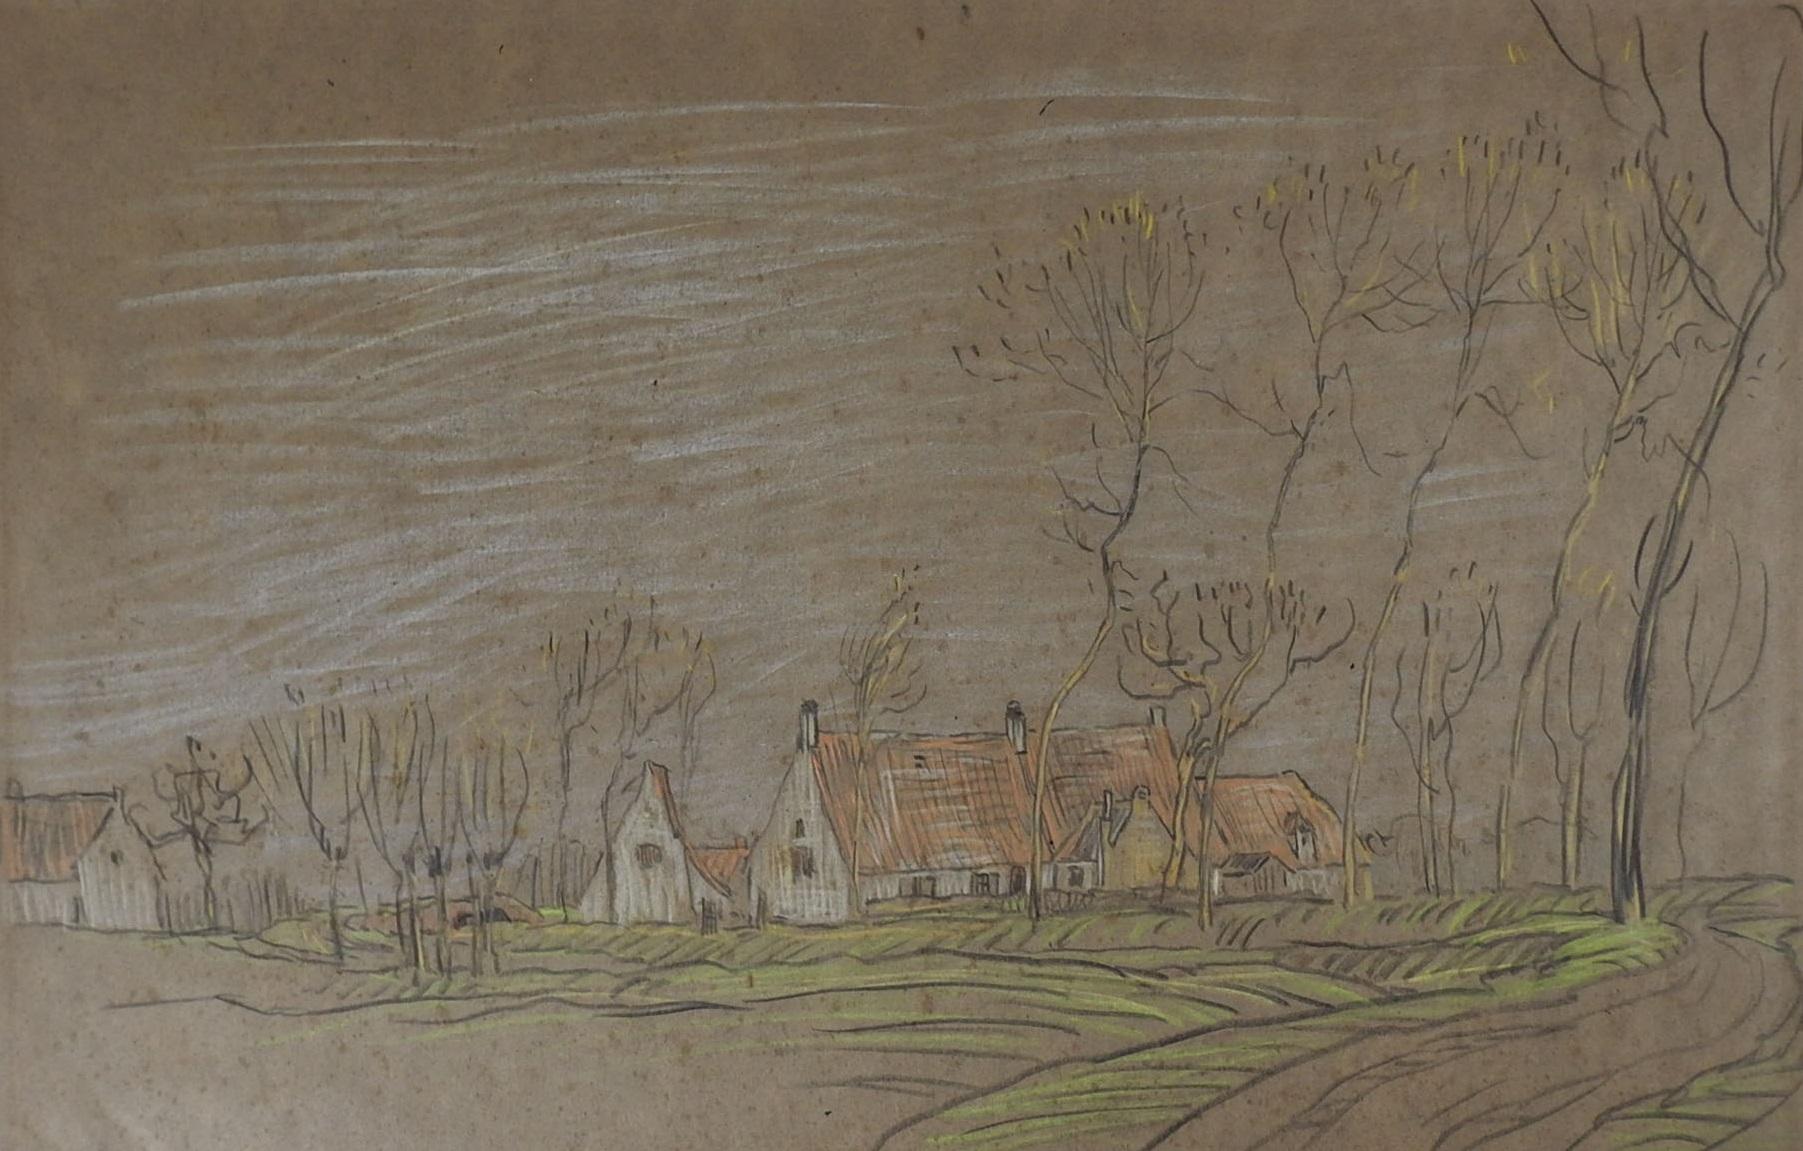 Vintage 1925 color drawing on dark tan paper of farm and orchard. Unsigned, dated Nov. 4 1925 lower left corner. Unframed, tape remains on verso.